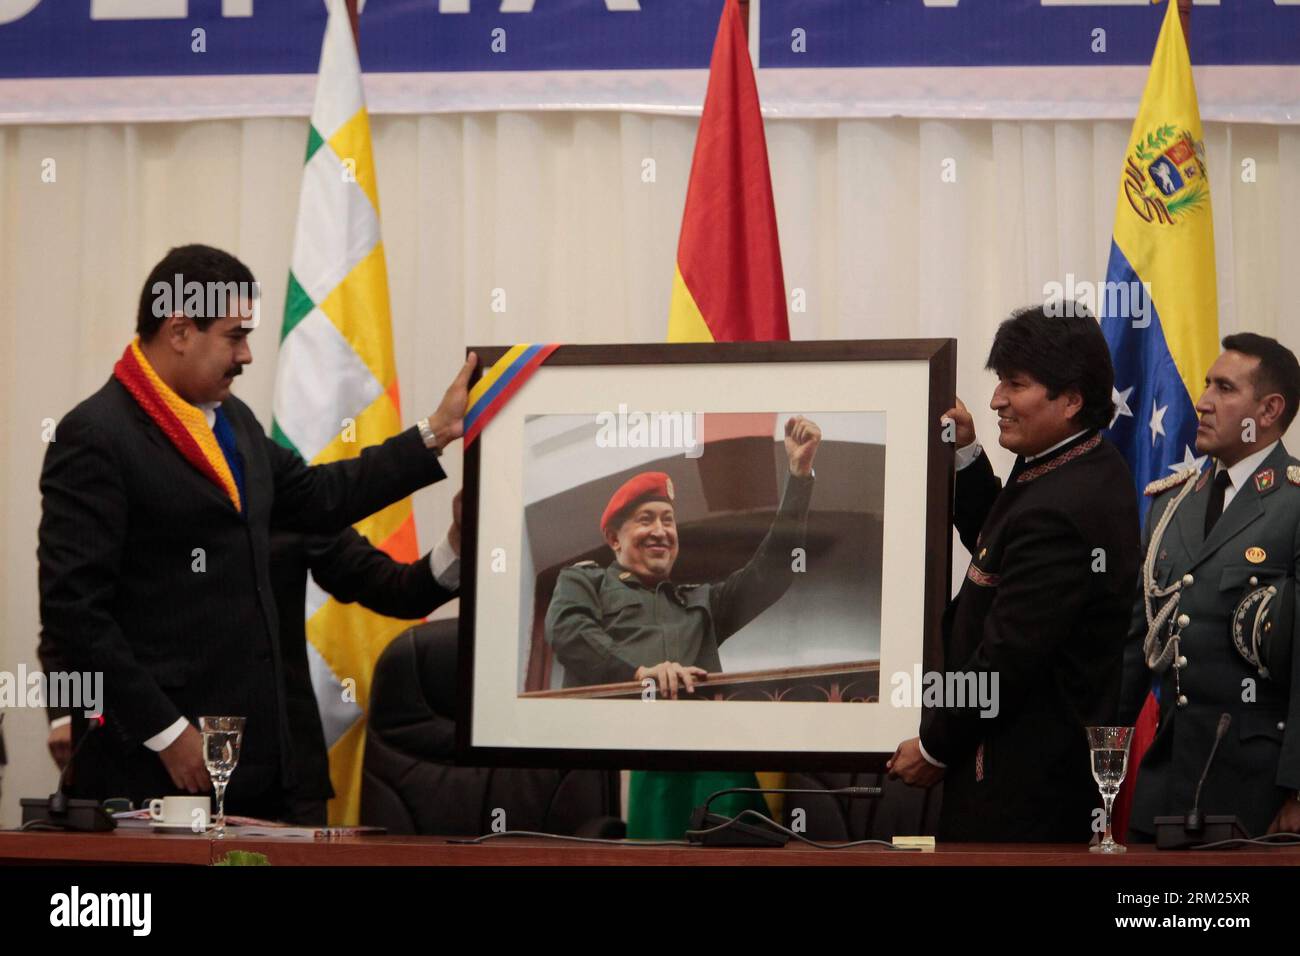 Bildnummer: 59703740  Datum: 25.05.2013  Copyright: imago/Xinhua Photo provided by Venezuela s Presidency shows Bolivian President Evo Morales (2nd R) and Venezuelan President Nicolas Maduro displaying a portrait of late former Venezuelan President Hugo Chavez during the second meeting of the Bolivia-Venezuela Joint Integration Commission, in Cochabamba City, Bolivia, on May 25, 2013. (Xinhua/Venezuelas Presidency) BOLIVIA-COCHABAMBA-VENEZUELA-POLITICS-MEETING PUBLICATIONxNOTxINxCHN People Politik premiumd x0x xsk 2013 quer     59703740 Date 25 05 2013 Copyright Imago XINHUA Photo provided by Stock Photo